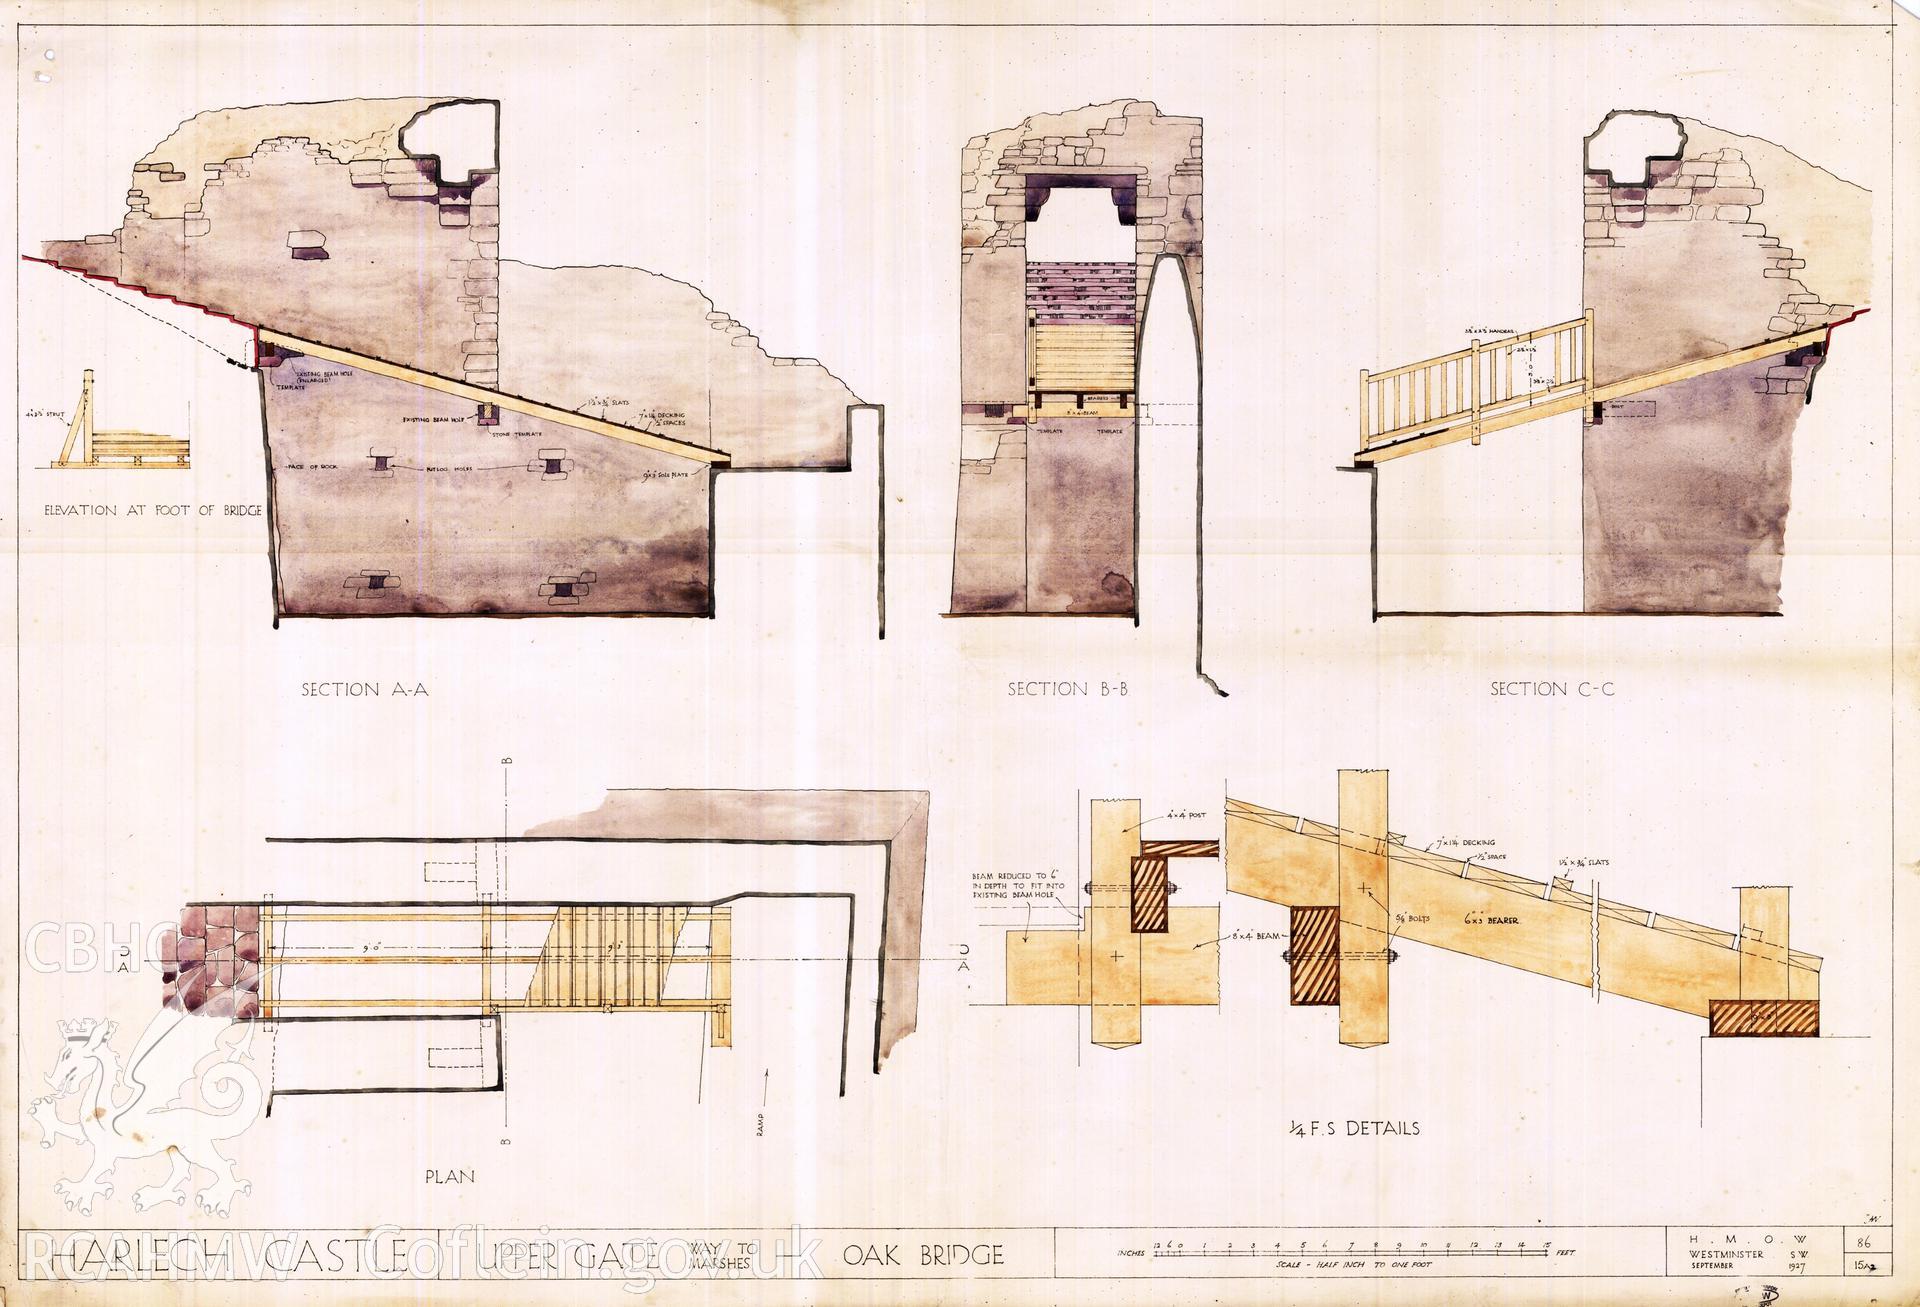 Cadw guardianship monument drawing of Harlech Castle. Outer ward,upper gate, bridge (tinted. Cadw Ref. No:86/15A2. Scale 1:24.